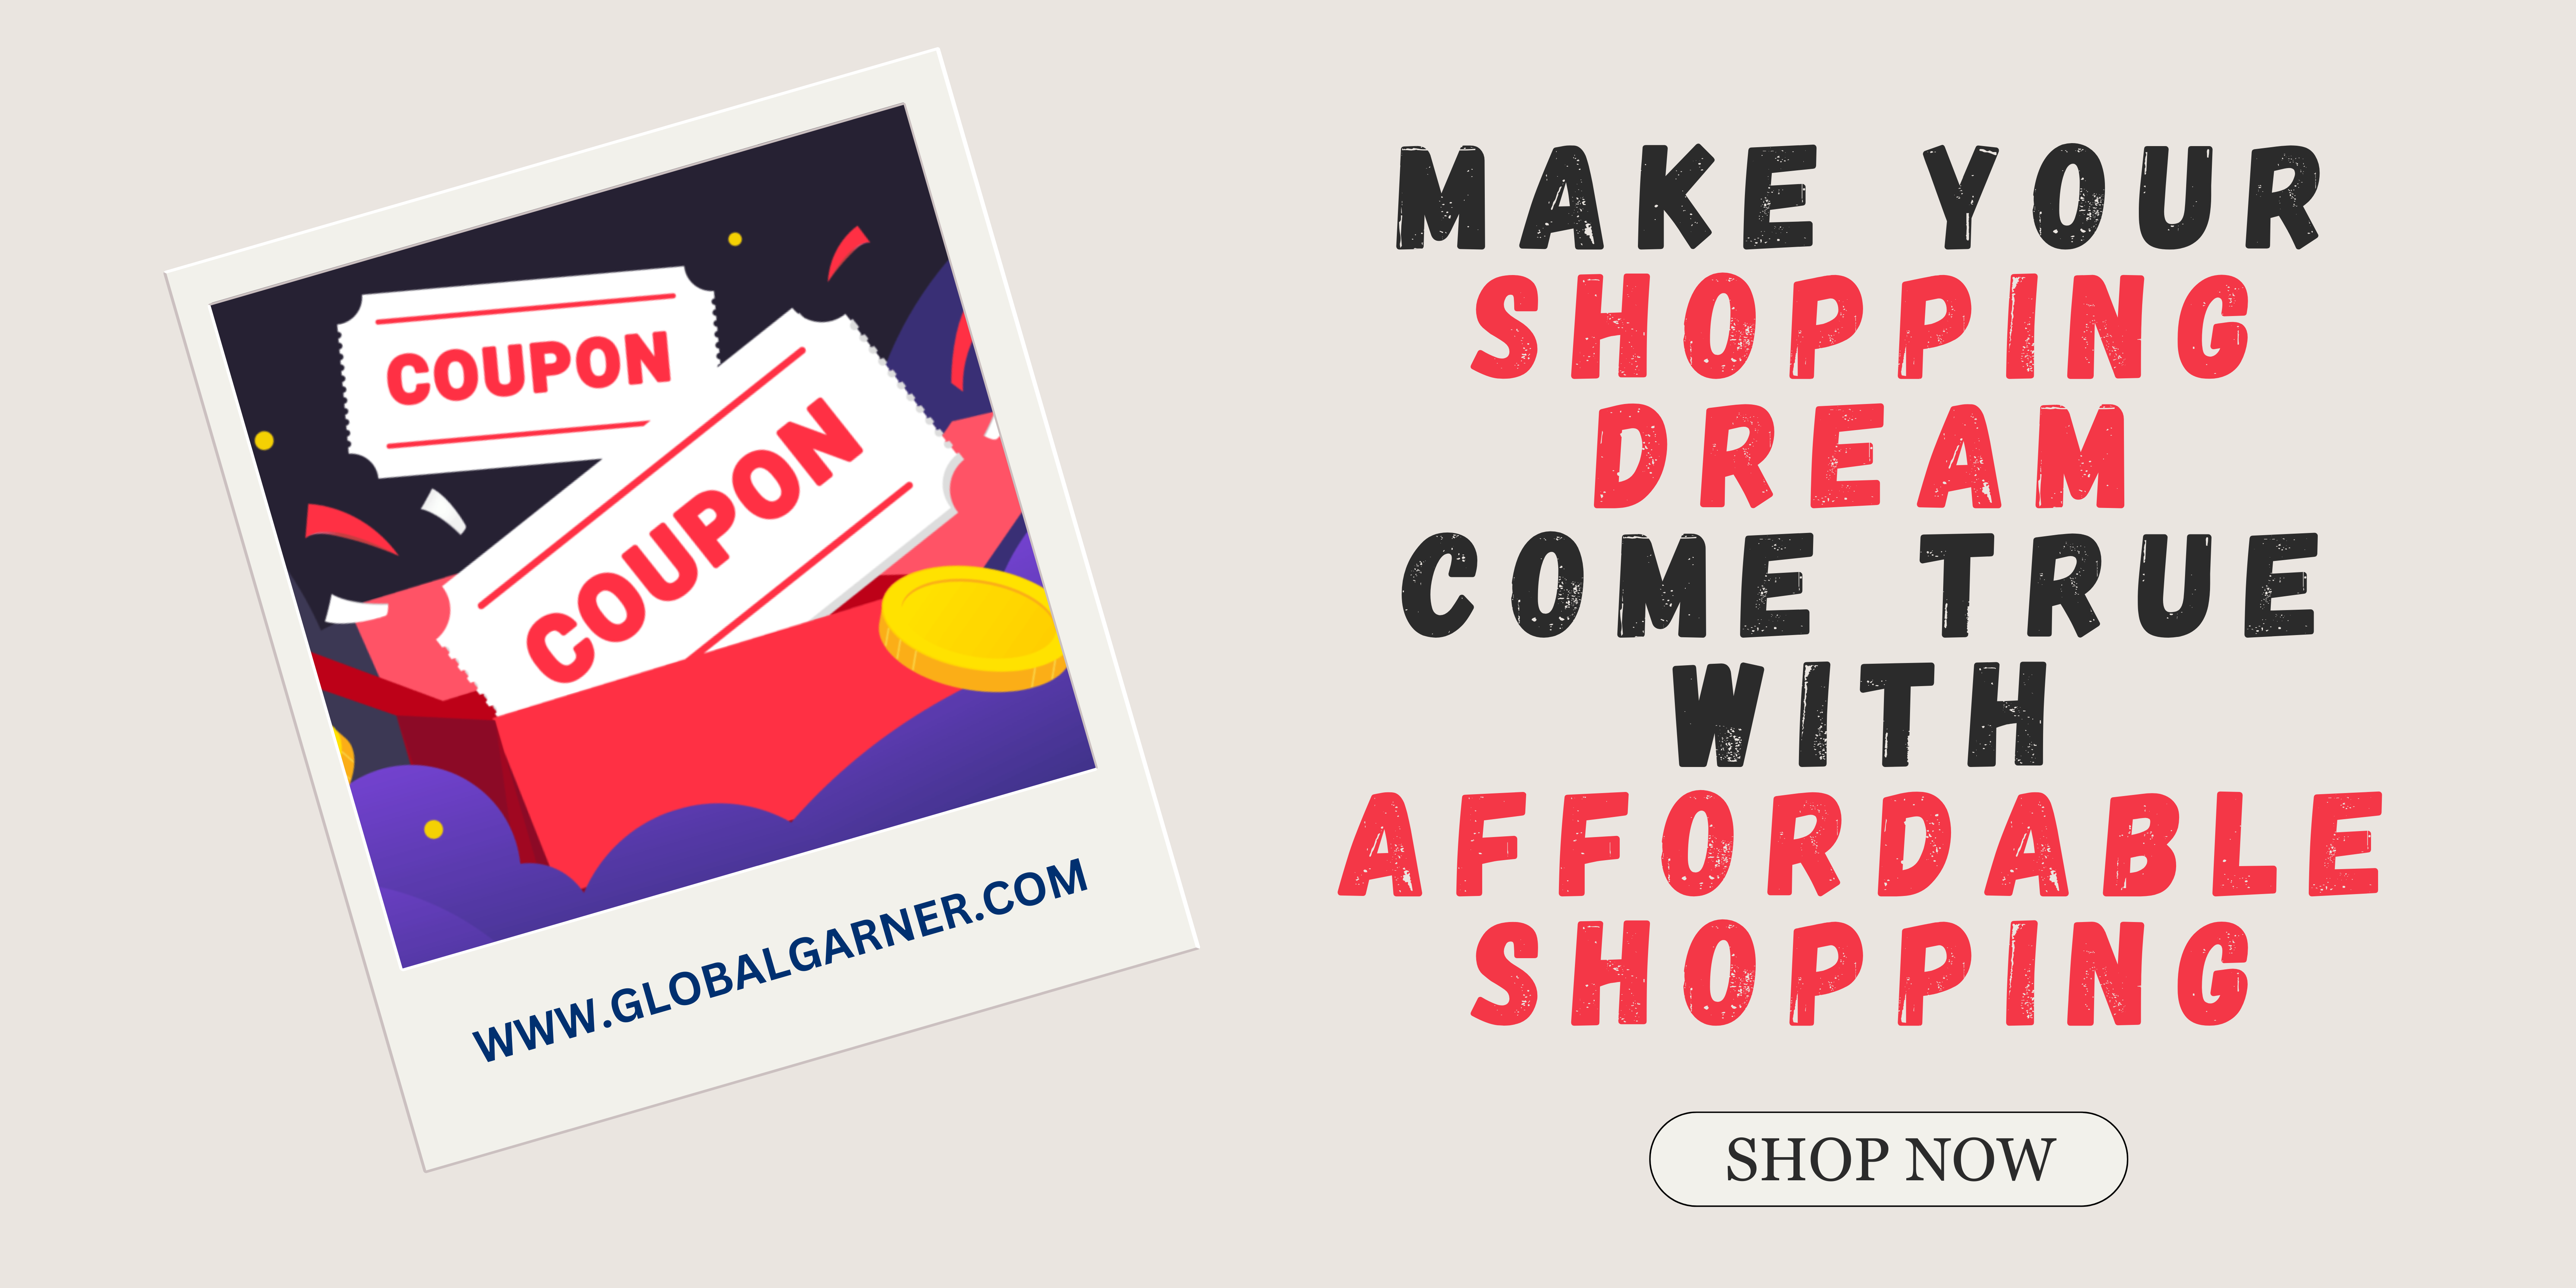 Make your Shopping Dream Come true with Affordable Shopping